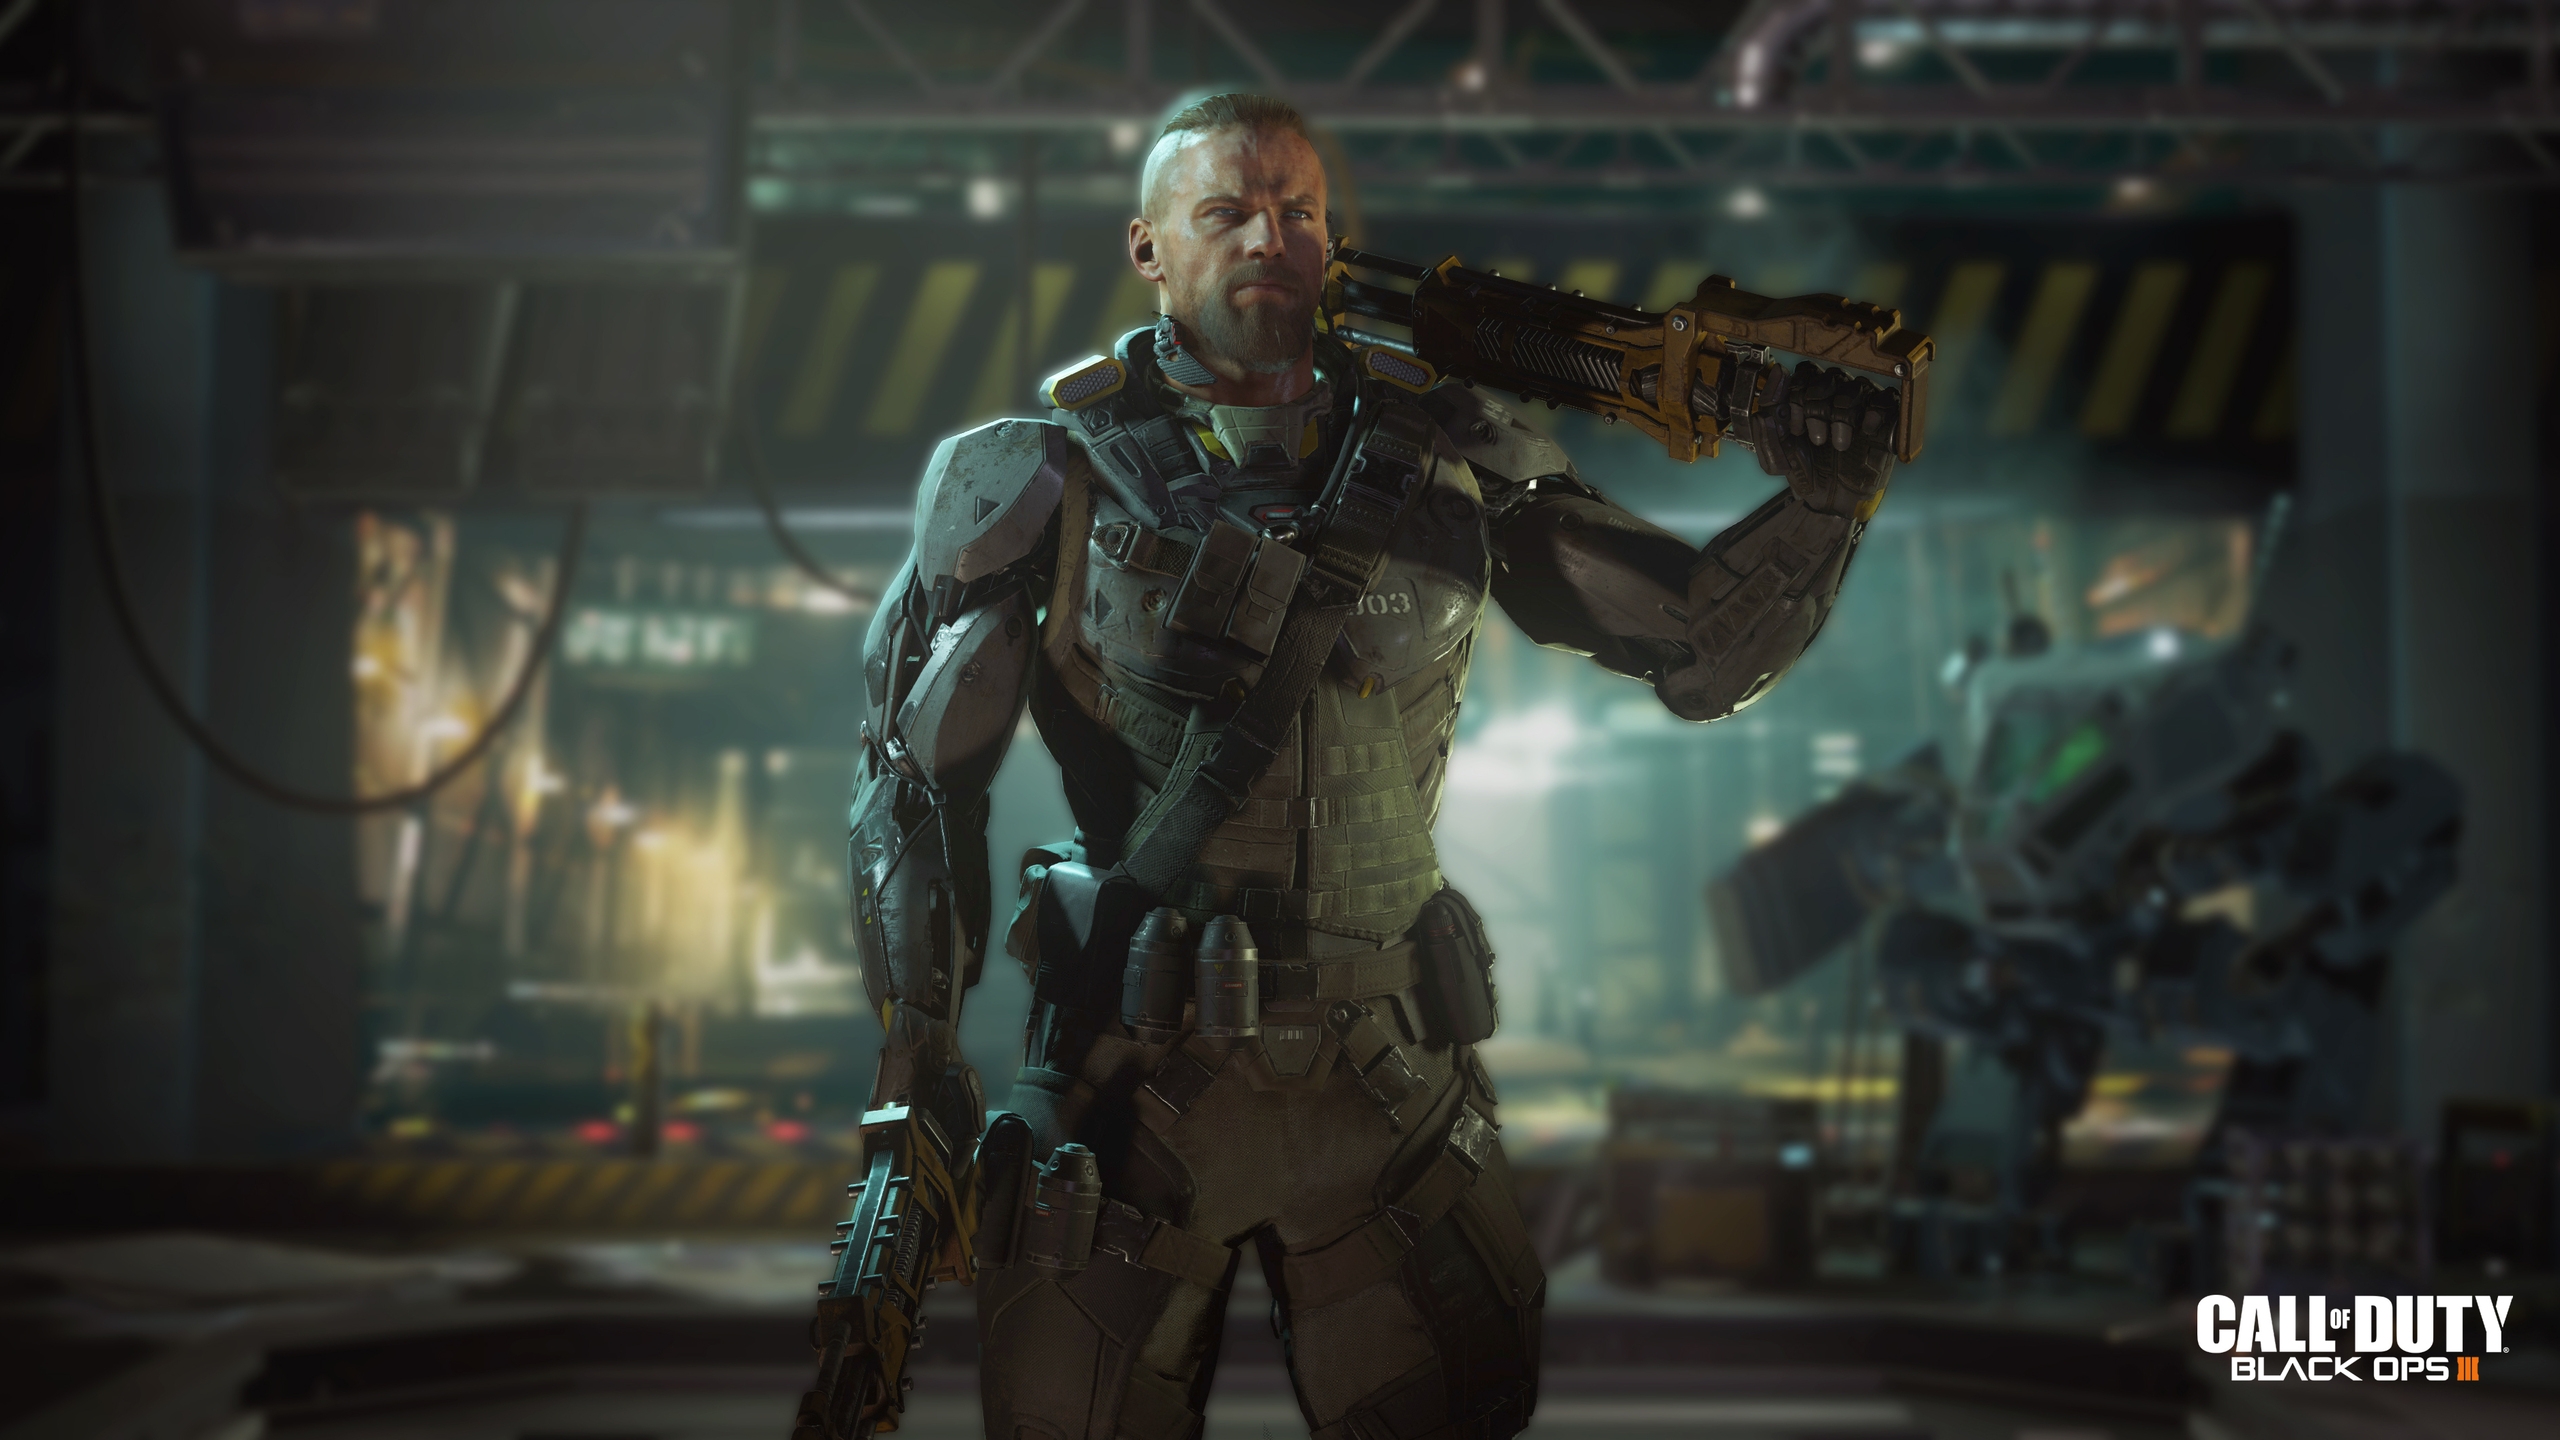 Call of Duty Black Ops 3 Specialist Ruin for 2560x1440 HDTV resolution